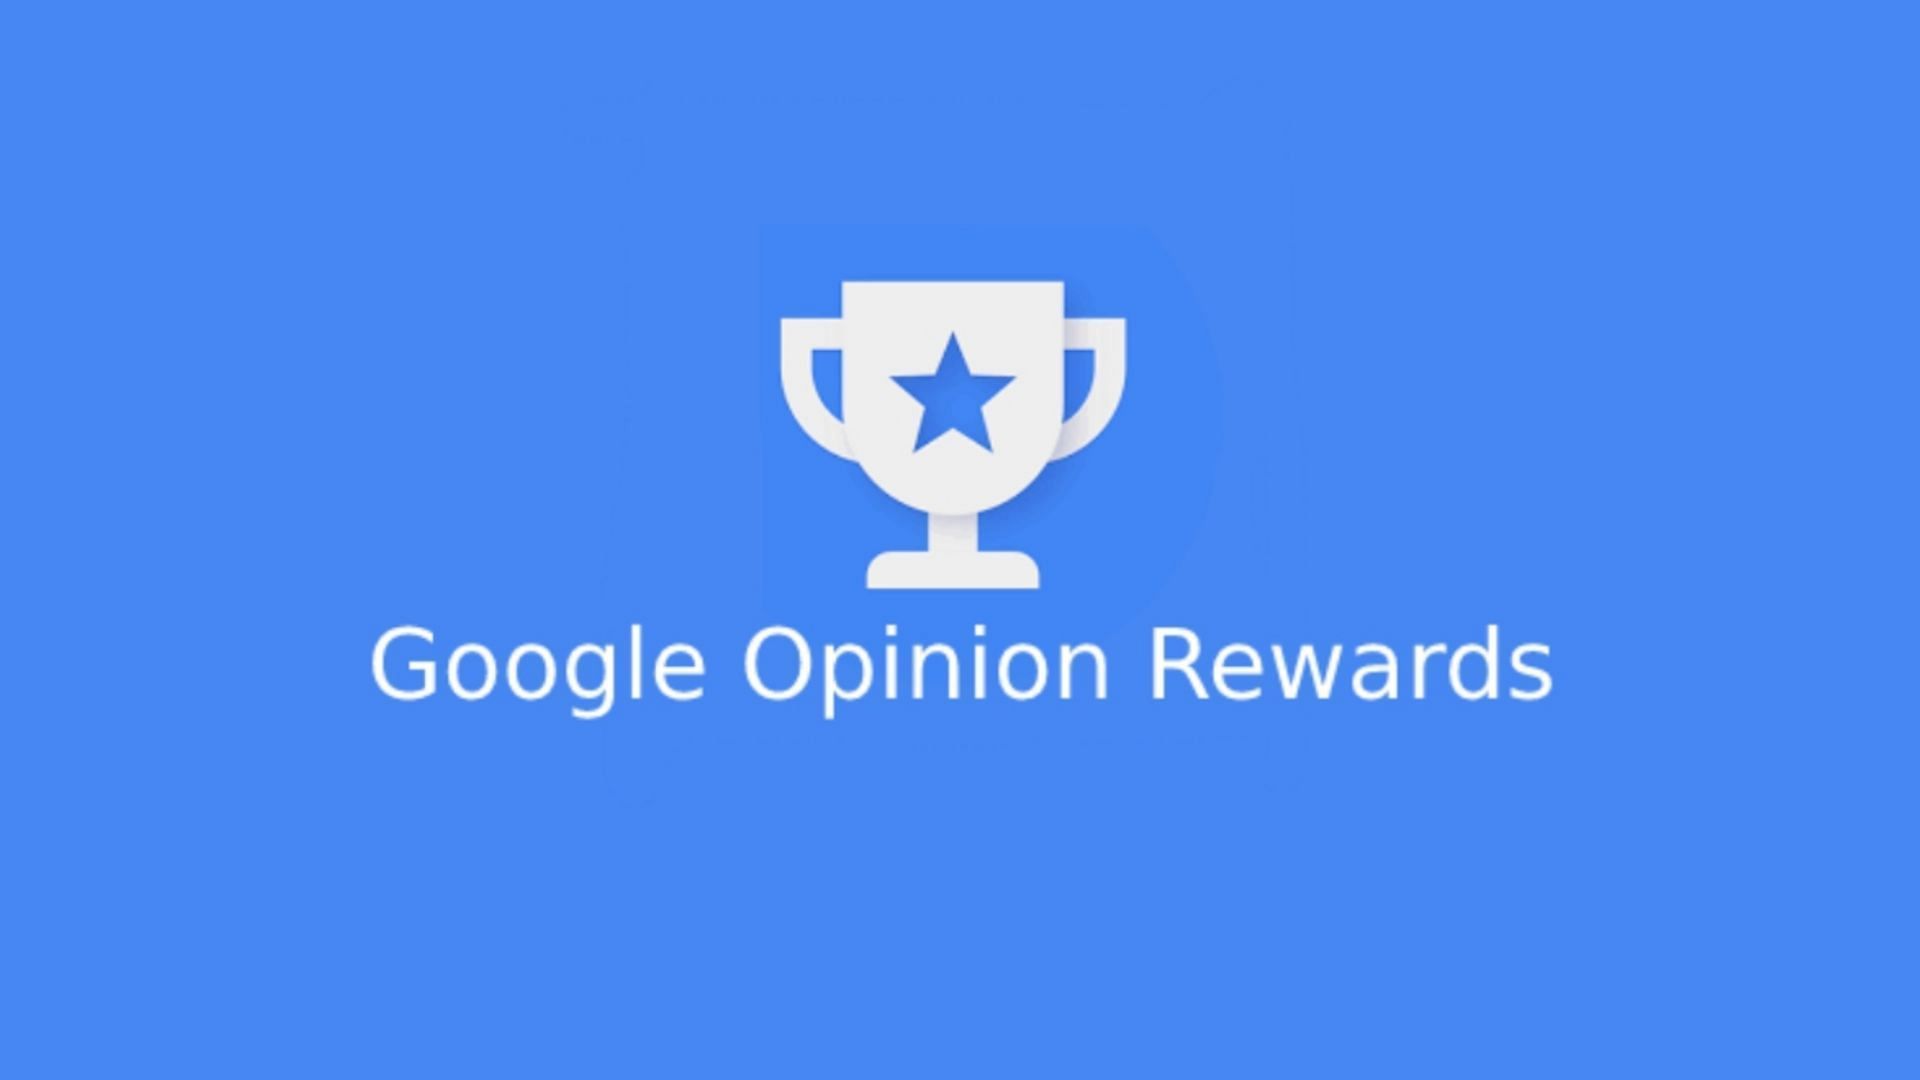 Players can earn Google Play points to purchase UC from the Google Opinion Rewards app. (Image via Google)